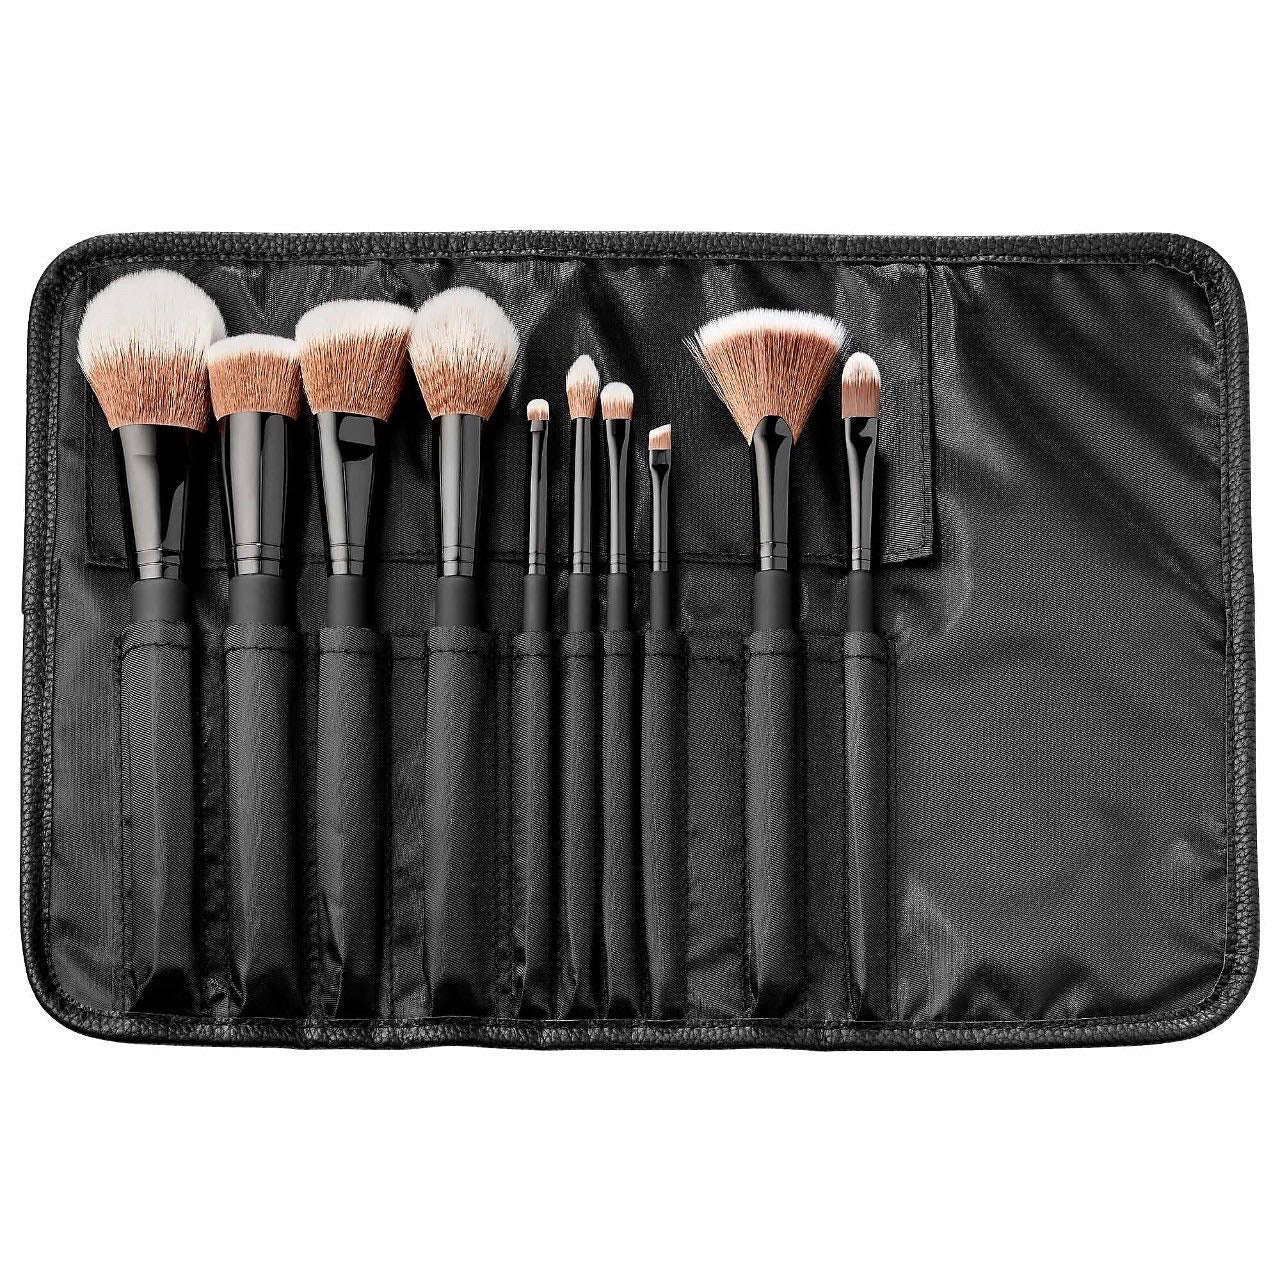 SEPHORA COLLECTION, READY TO ROLL BRUSH SET